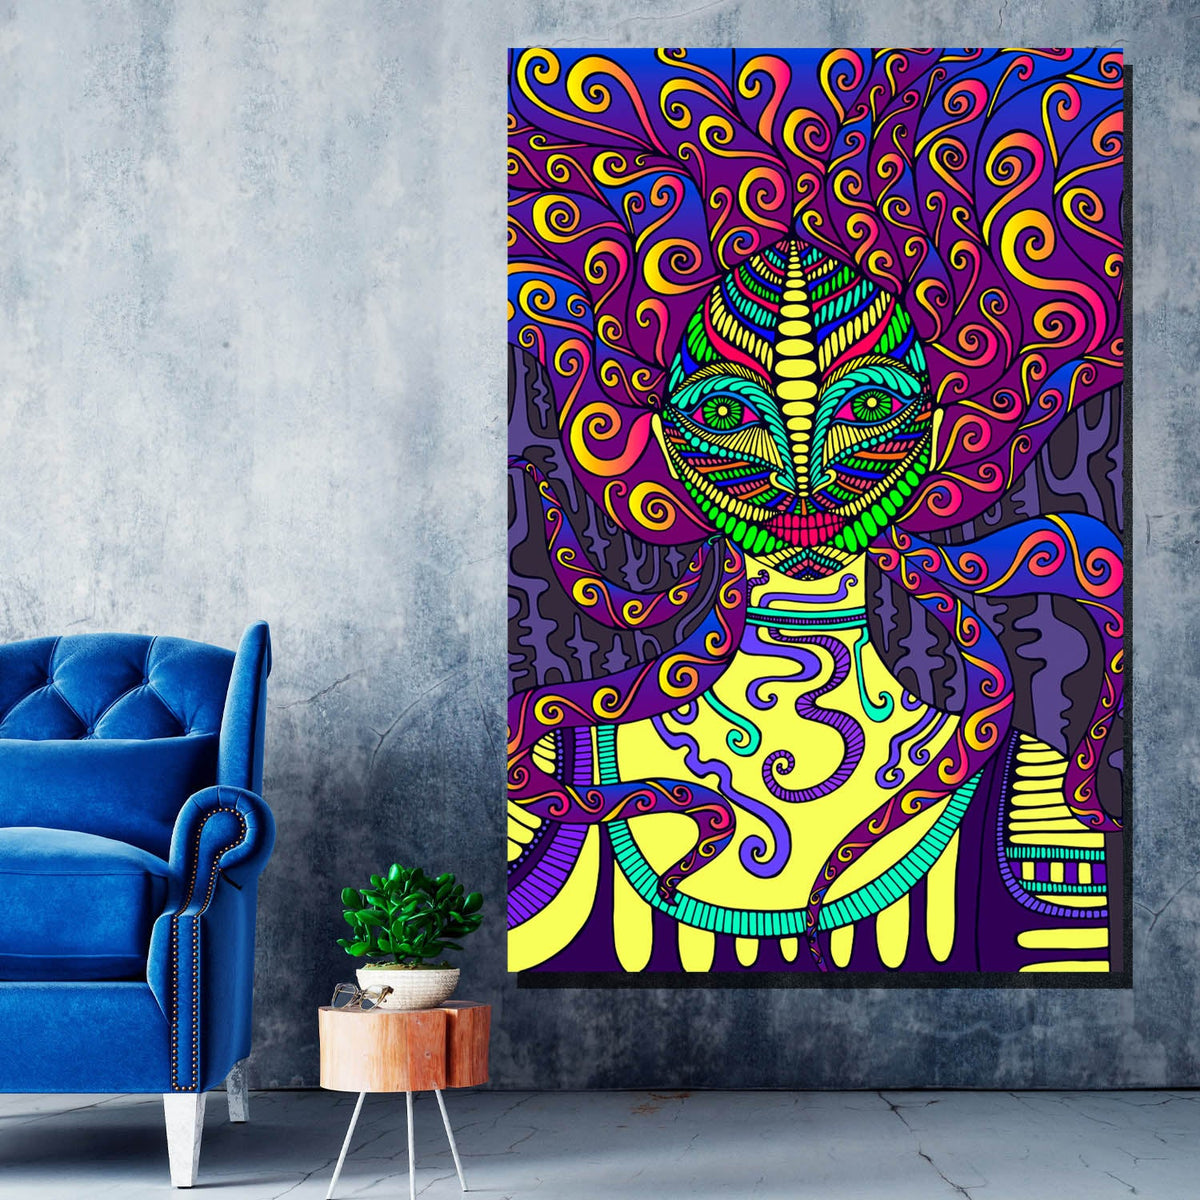 https://cdn.shopify.com/s/files/1/0387/9986/8044/products/PsychedelicWomanCanvasArtprintStretched-4.jpg